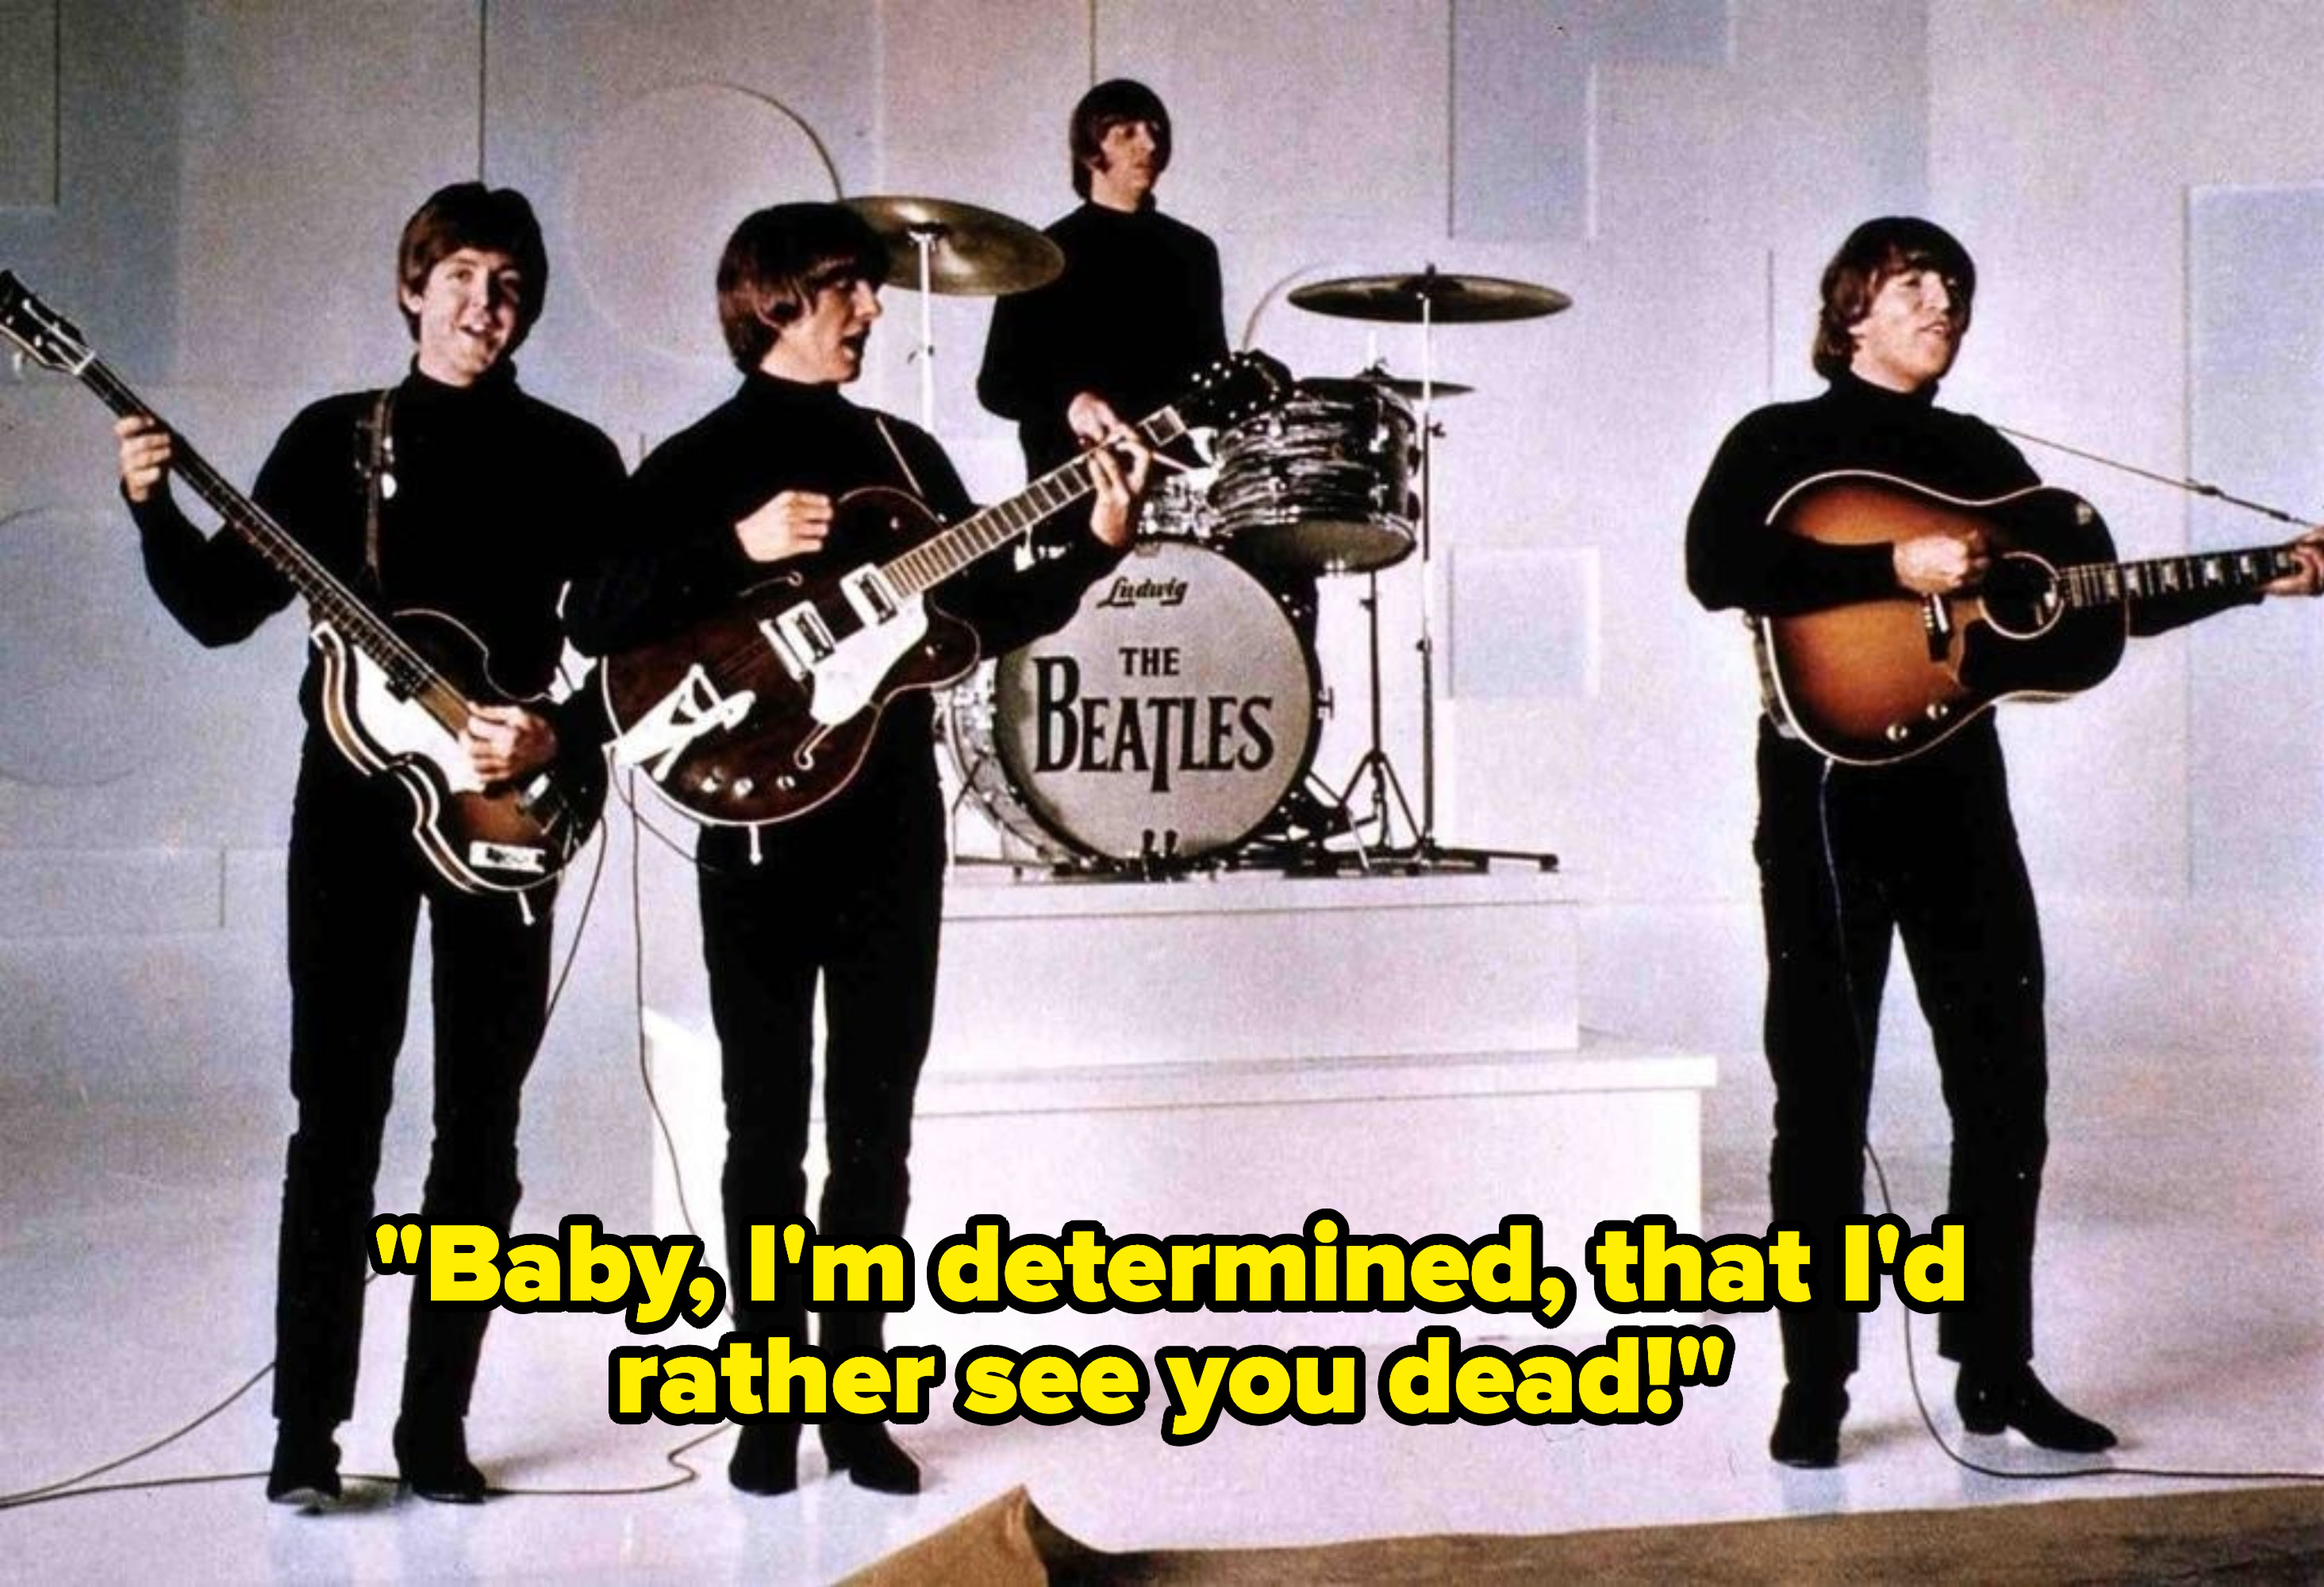 Beatles performing and lyrics, &quot;Baby I&#x27;m determined, that I&#x27;d rather see you dead&quot;